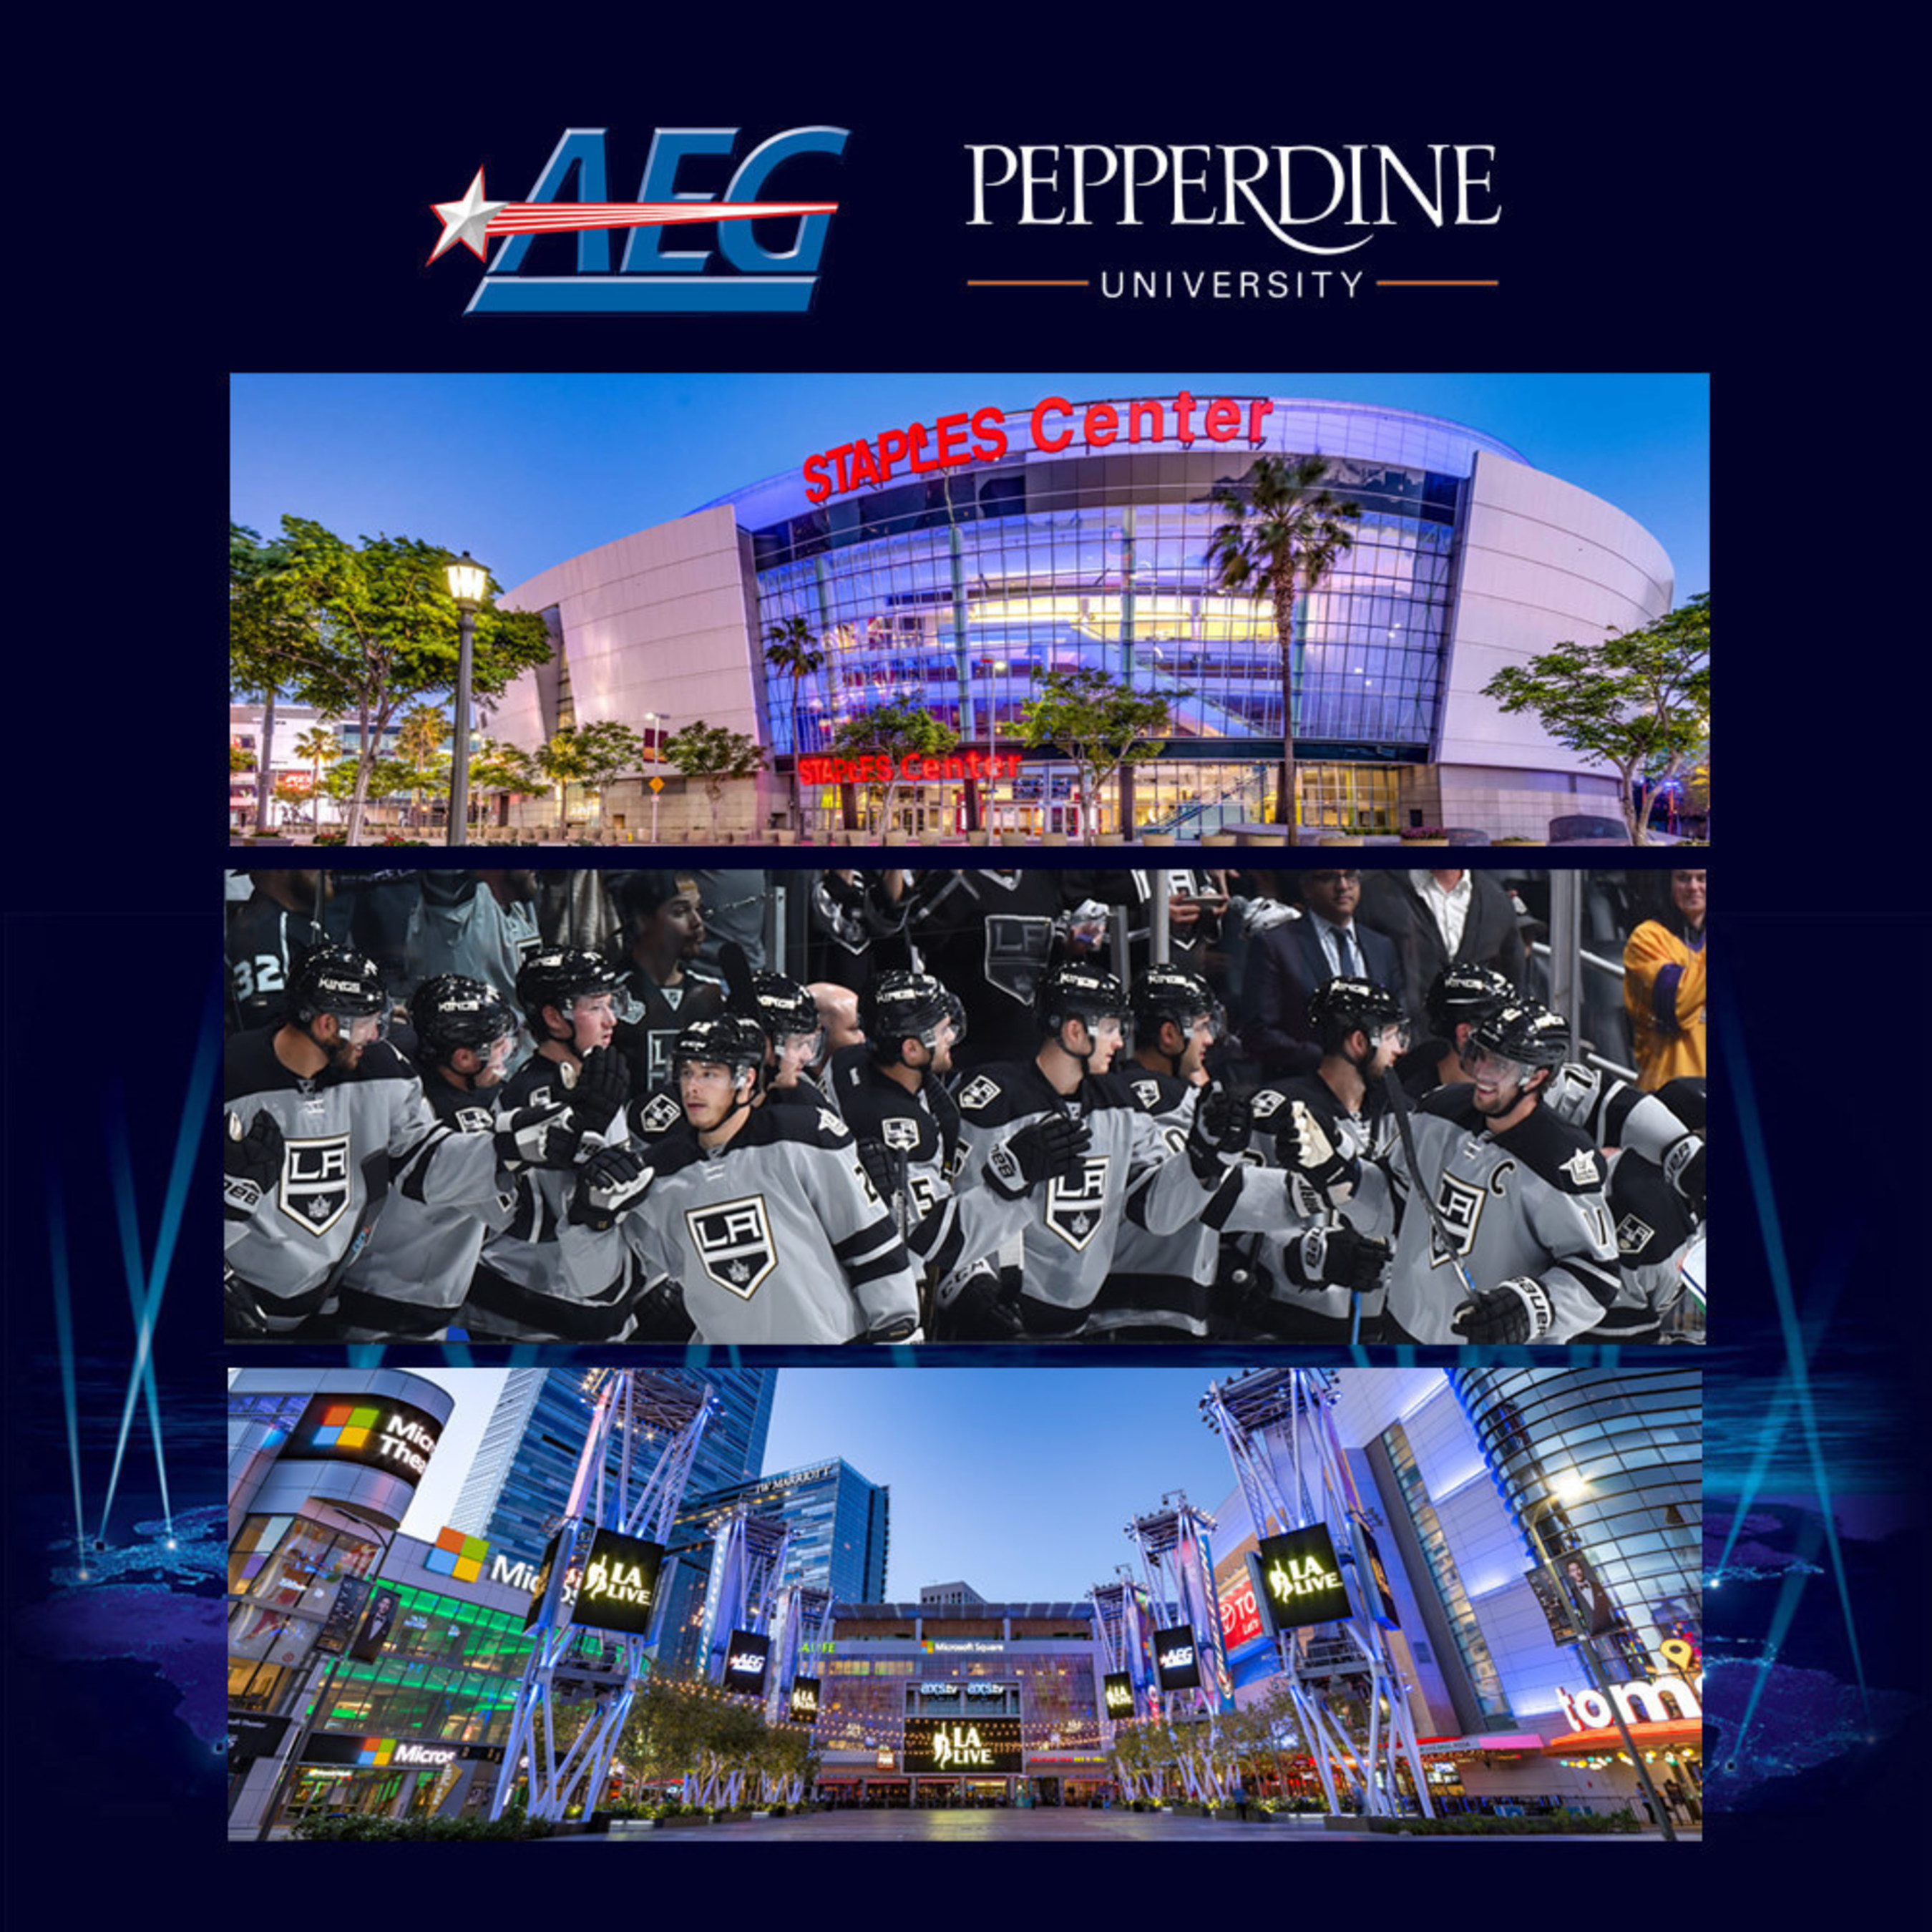 AEG AND PEPPERDINE UNIVERSITY PARTNER TO BRING SPORTS AND ENTERTAINMENT FOCUSED EDUCATION TO STUDENTS